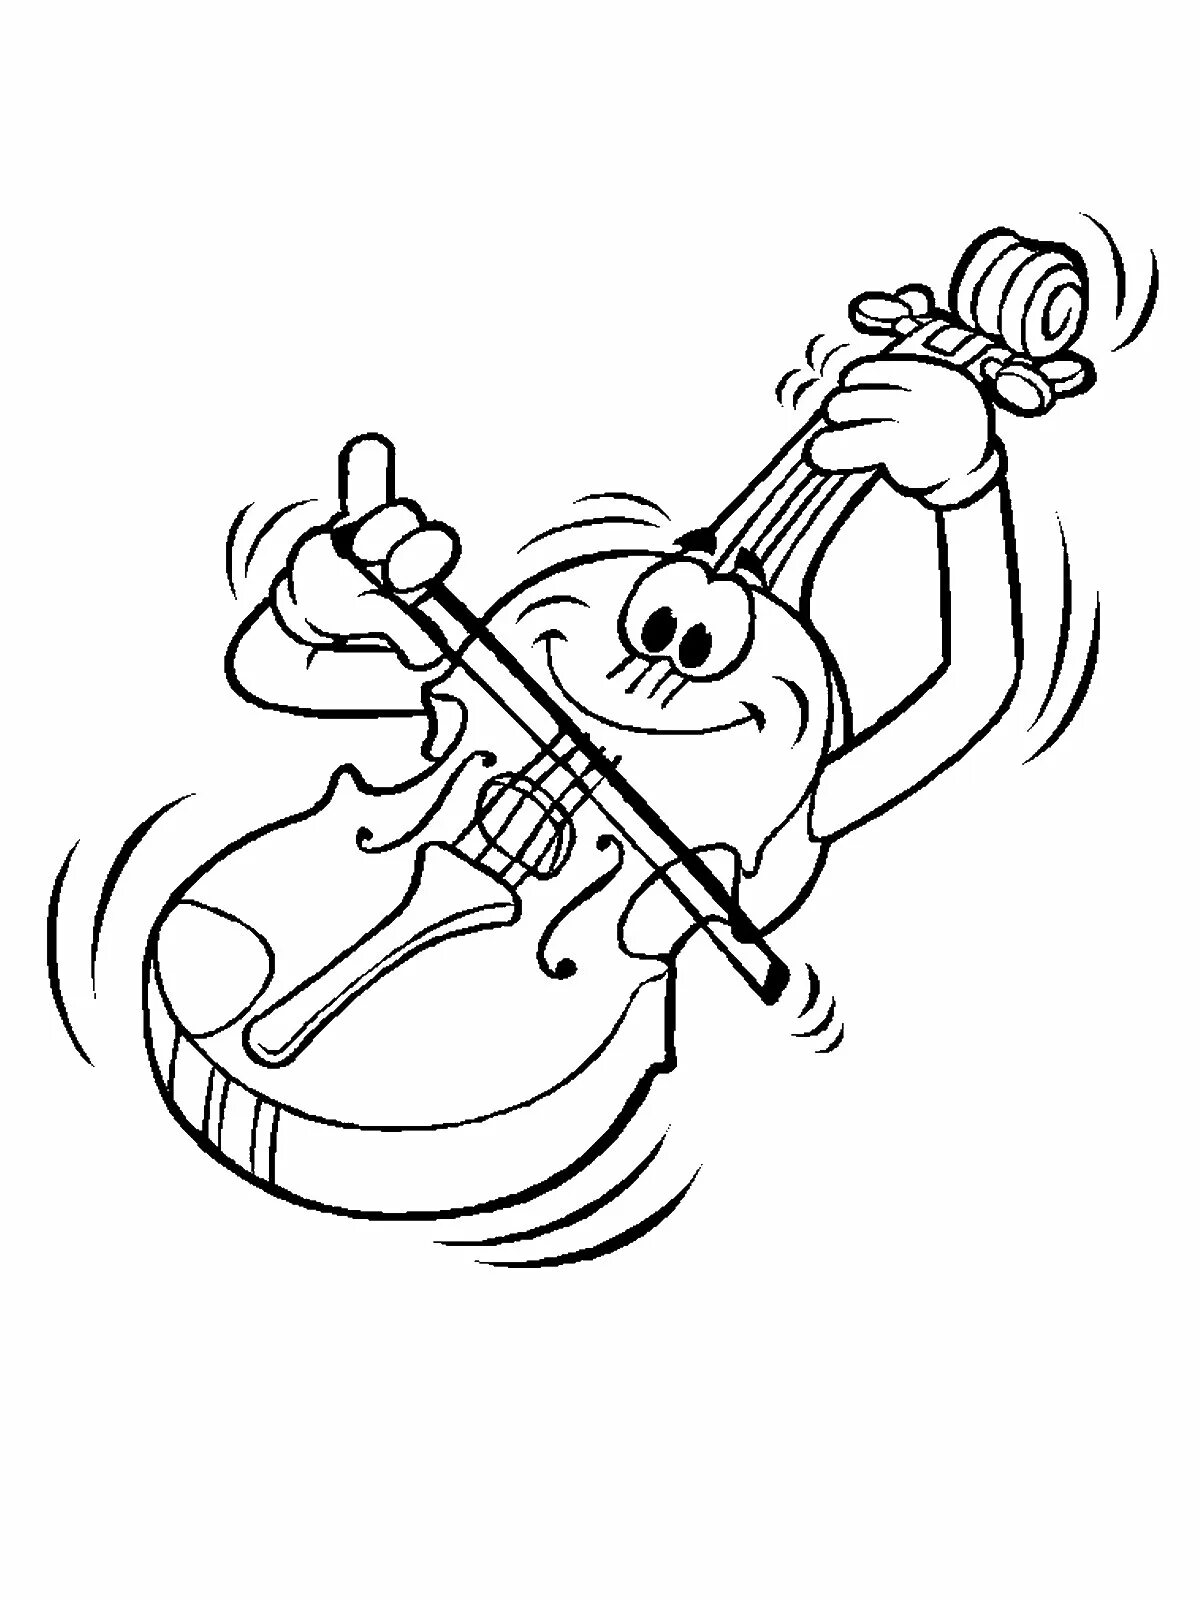 Perfect violin coloring page for students